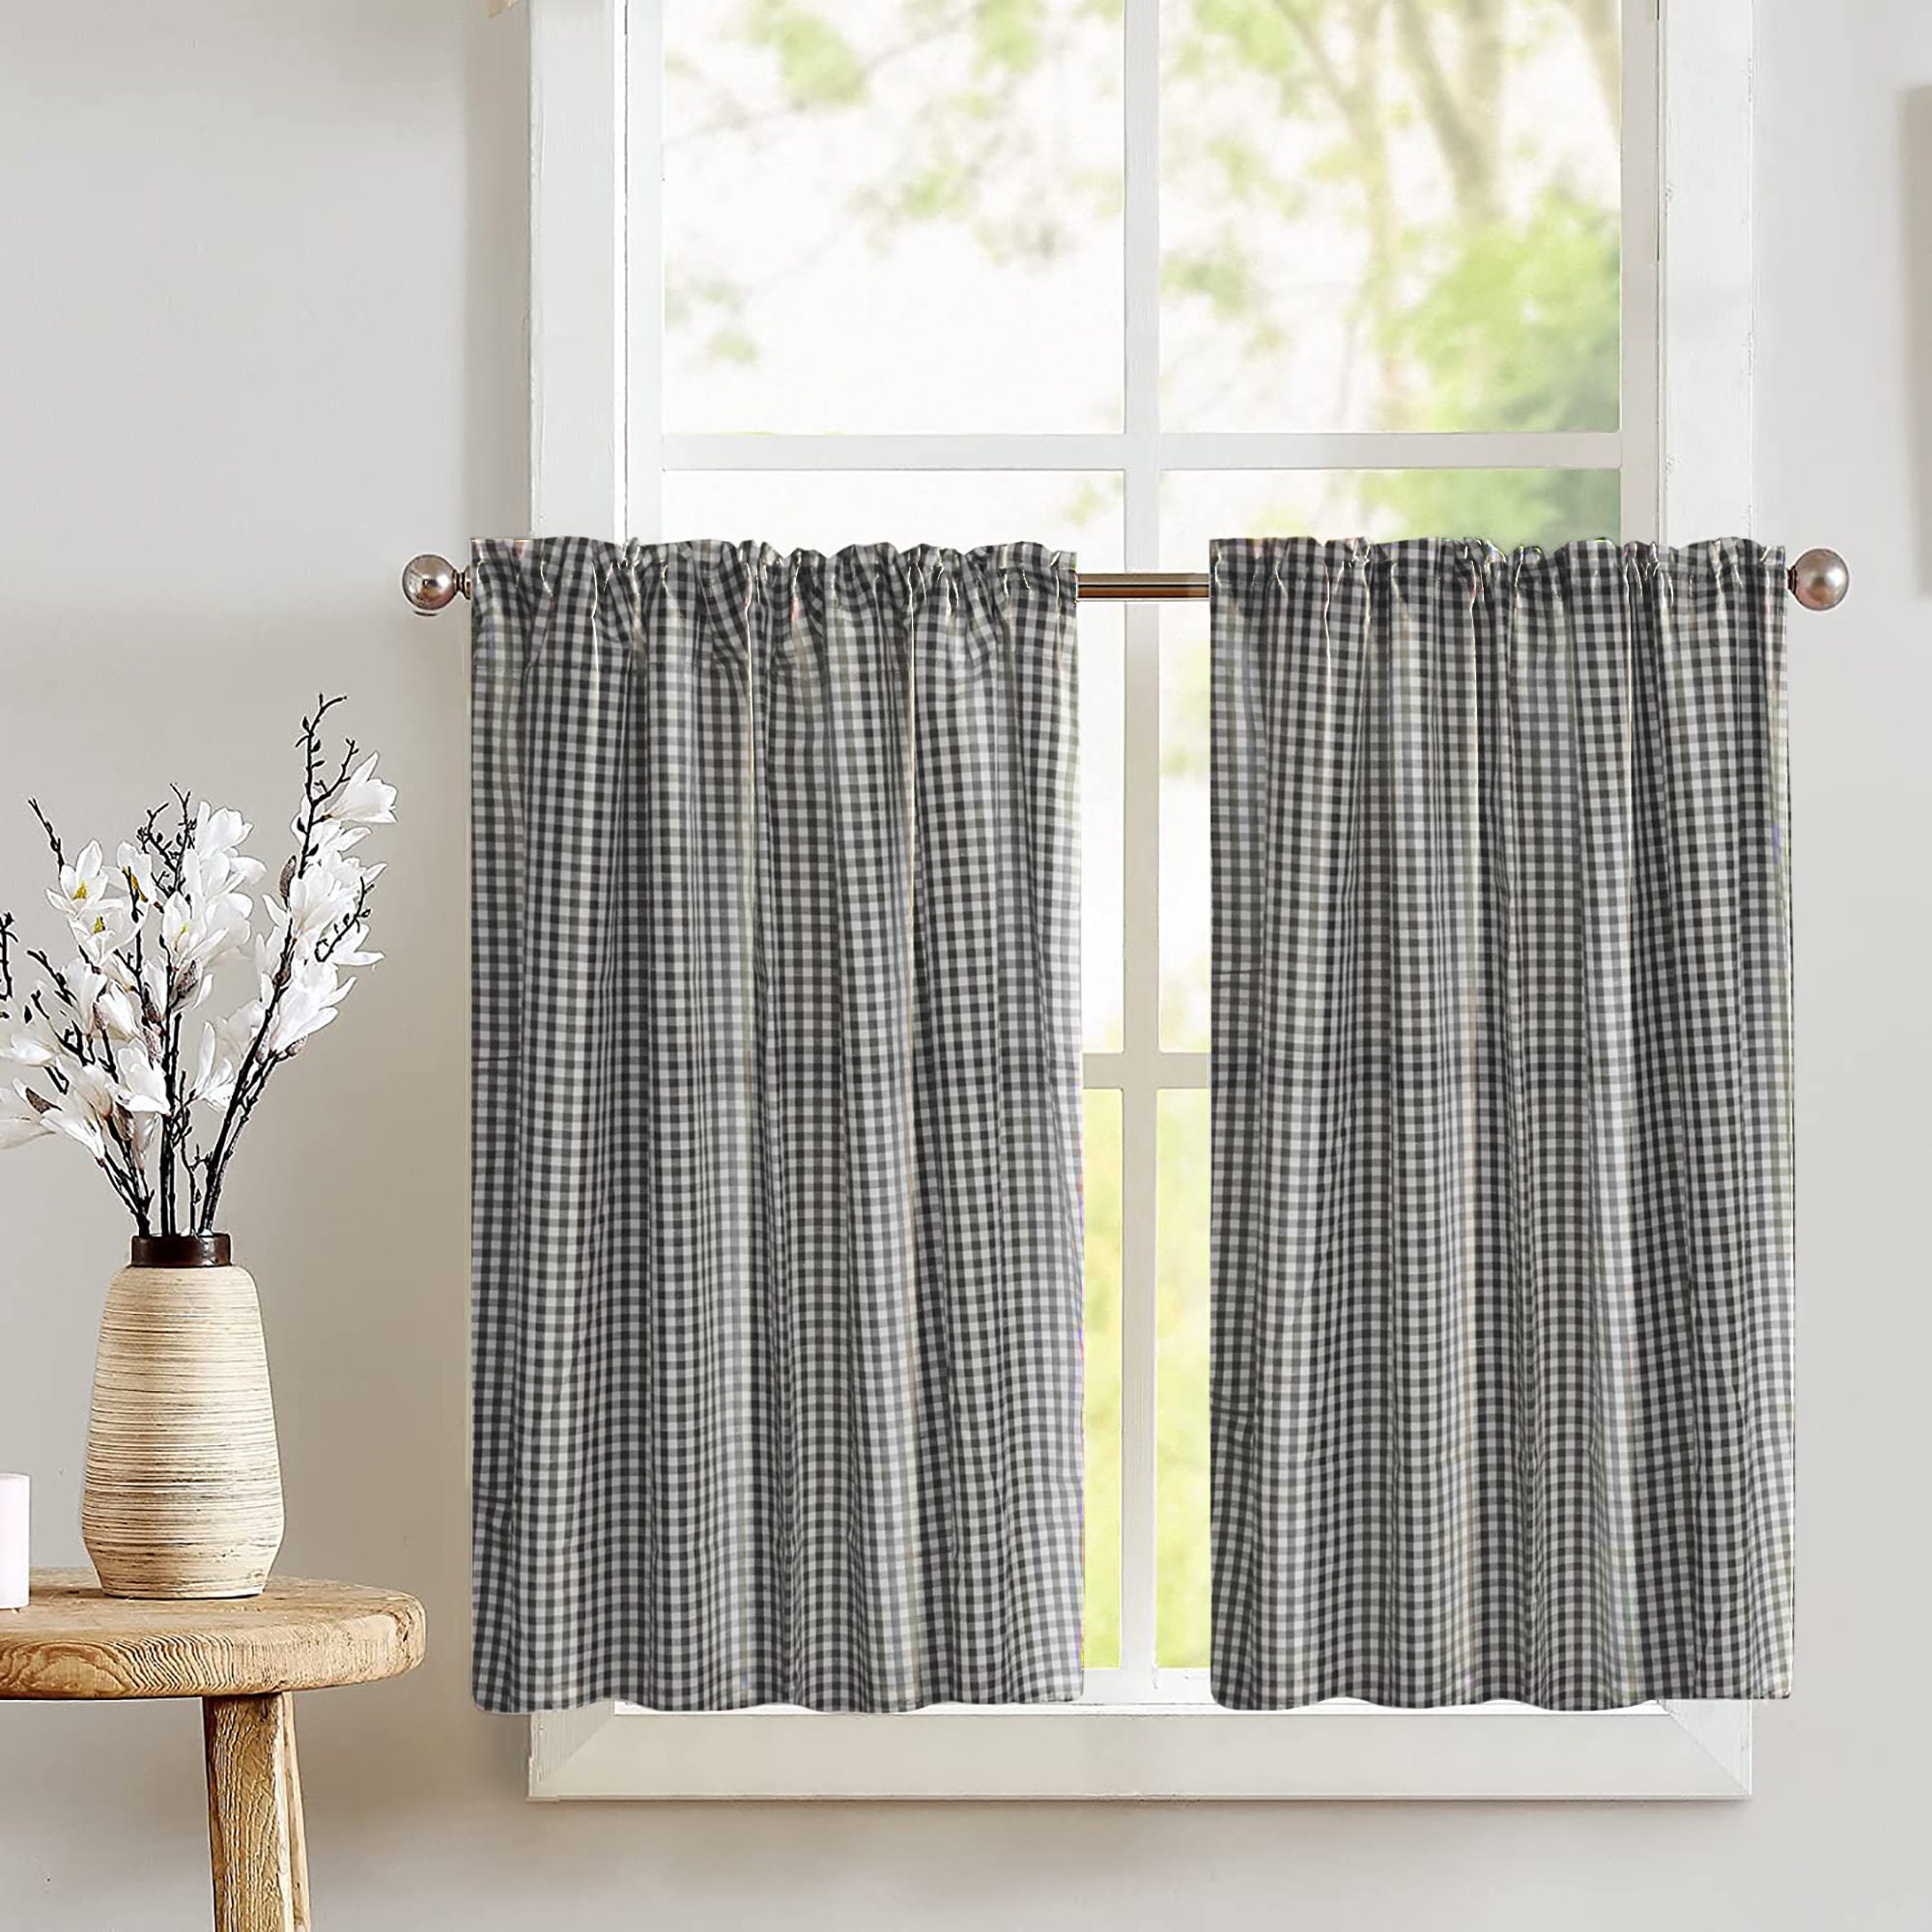  Haperlare Tier Curtains for Kitchen Window, Plaid Gingham  Pattern Short Bathroom Window Curtain, Buffalo Check Yarn Dyed Half Window  Kitchen Cafe Curtains, 28 x 30, Black/White, Set of 2 : Home